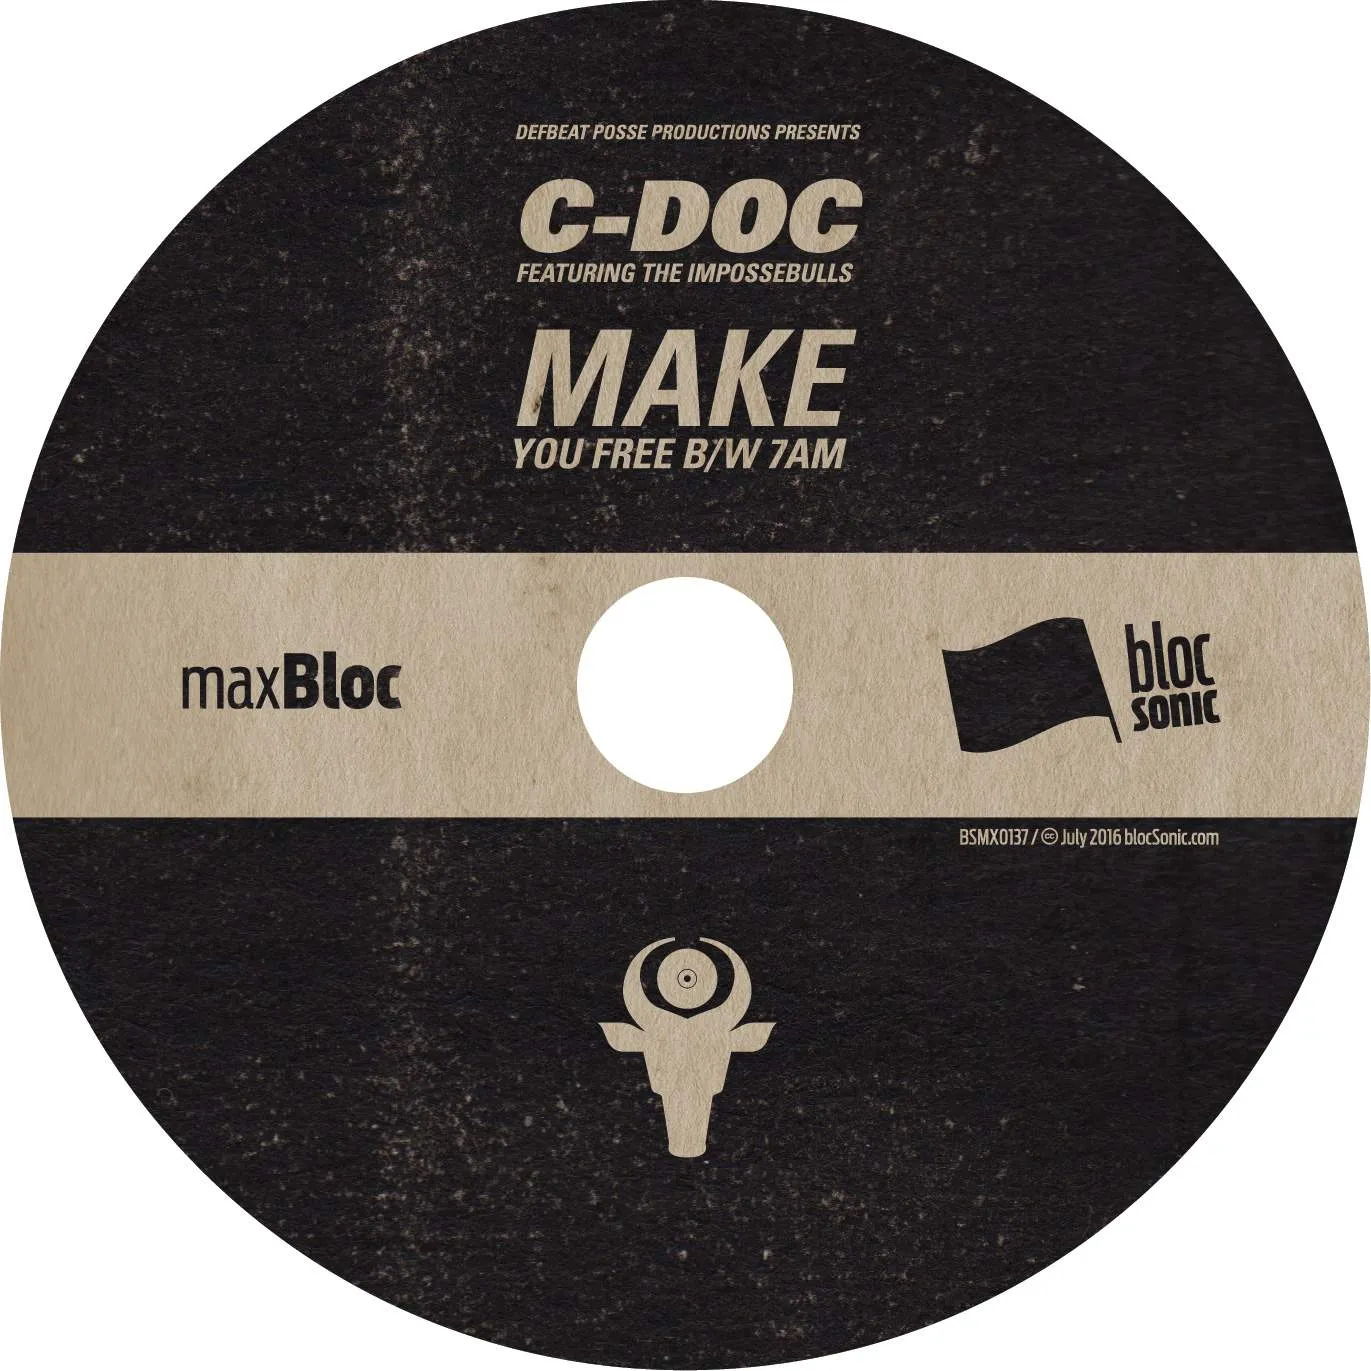 Album disc for “Make You Free b/w 7am” by C-Doc